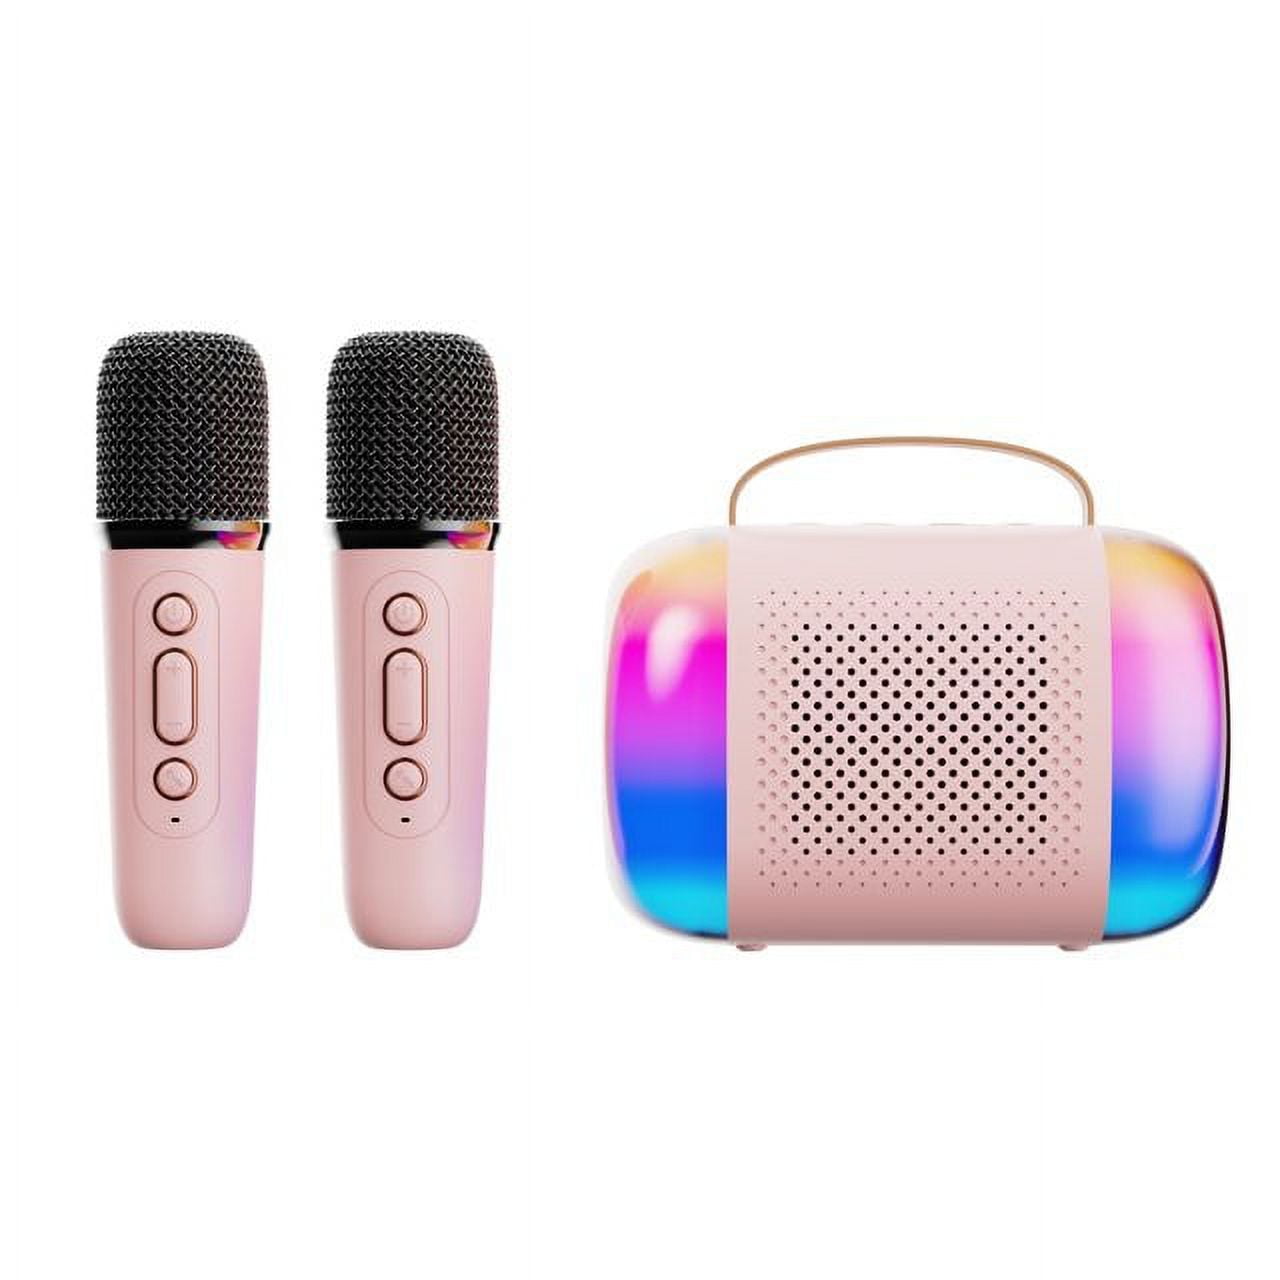 Eccomum Mini Karaoke Machine, Portable Bluetooth Speaker with 2 Wireless  Microphones and LED Lights Karaoke Gifts for Adults Kids Birthday Home  Party